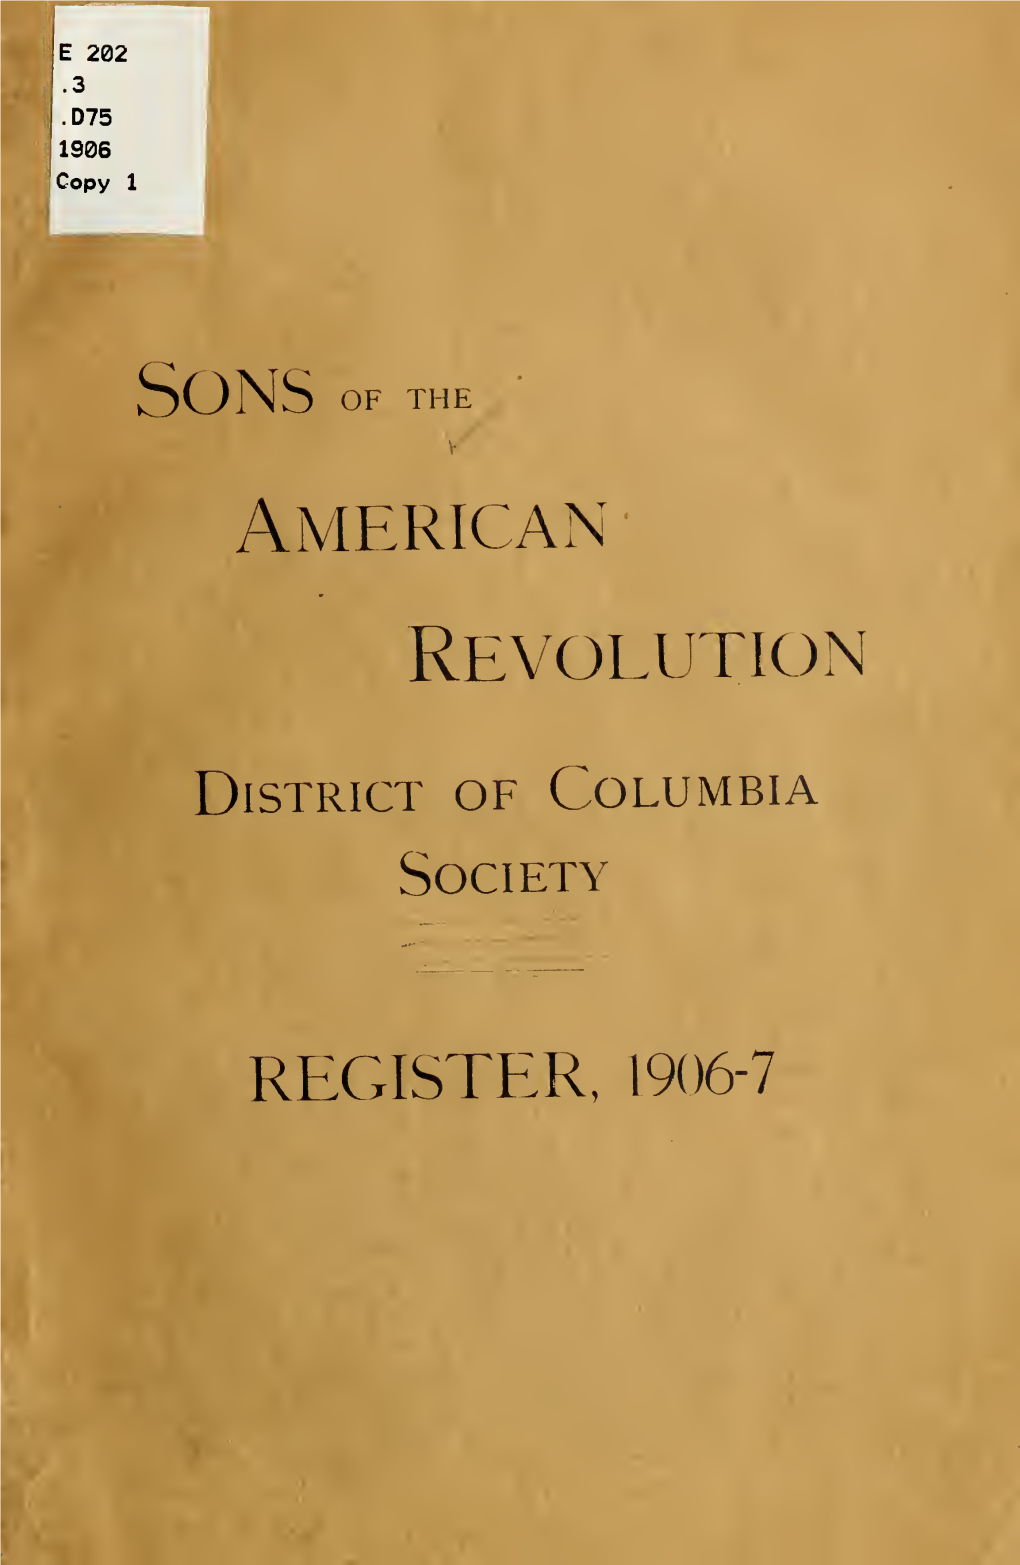 Register of the District of Columbia Society, Sons of the American